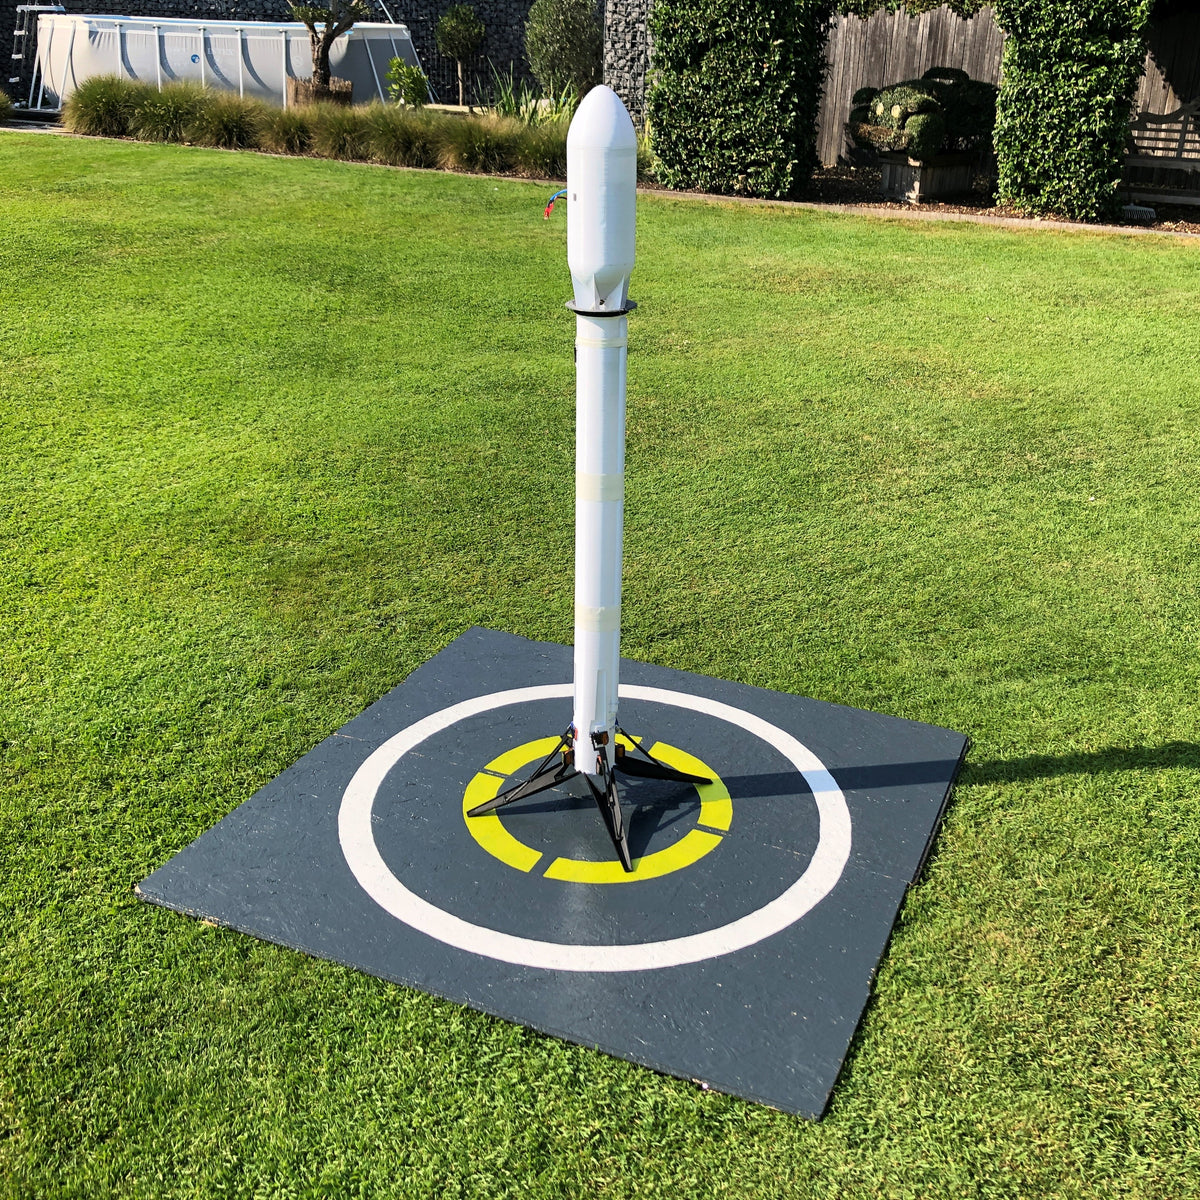 3D-printable SpaceX rocket on it's launch pad.